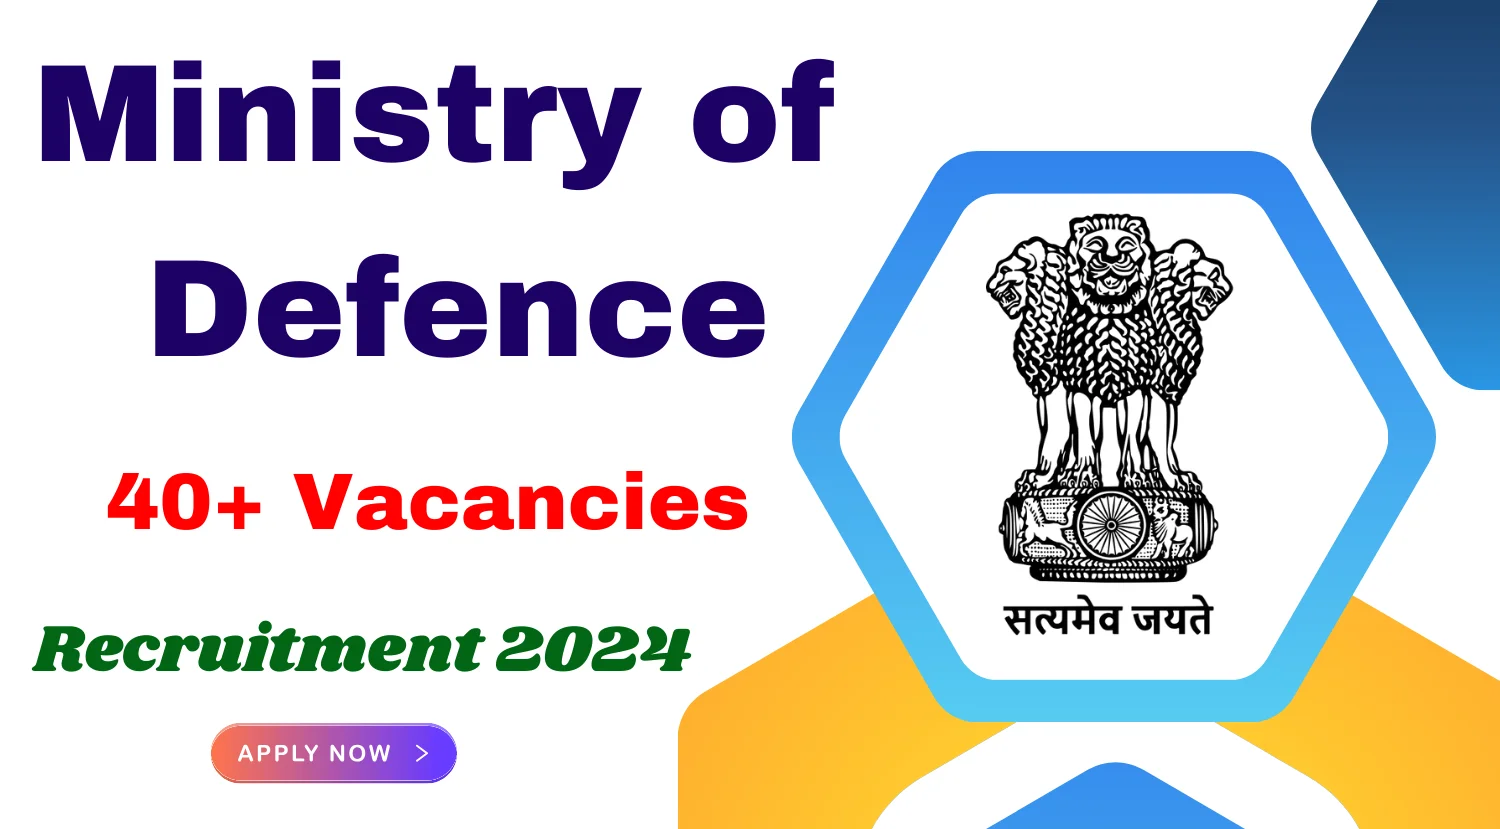 Ministry of Defence Apprenticeship Training Recruitment 2024